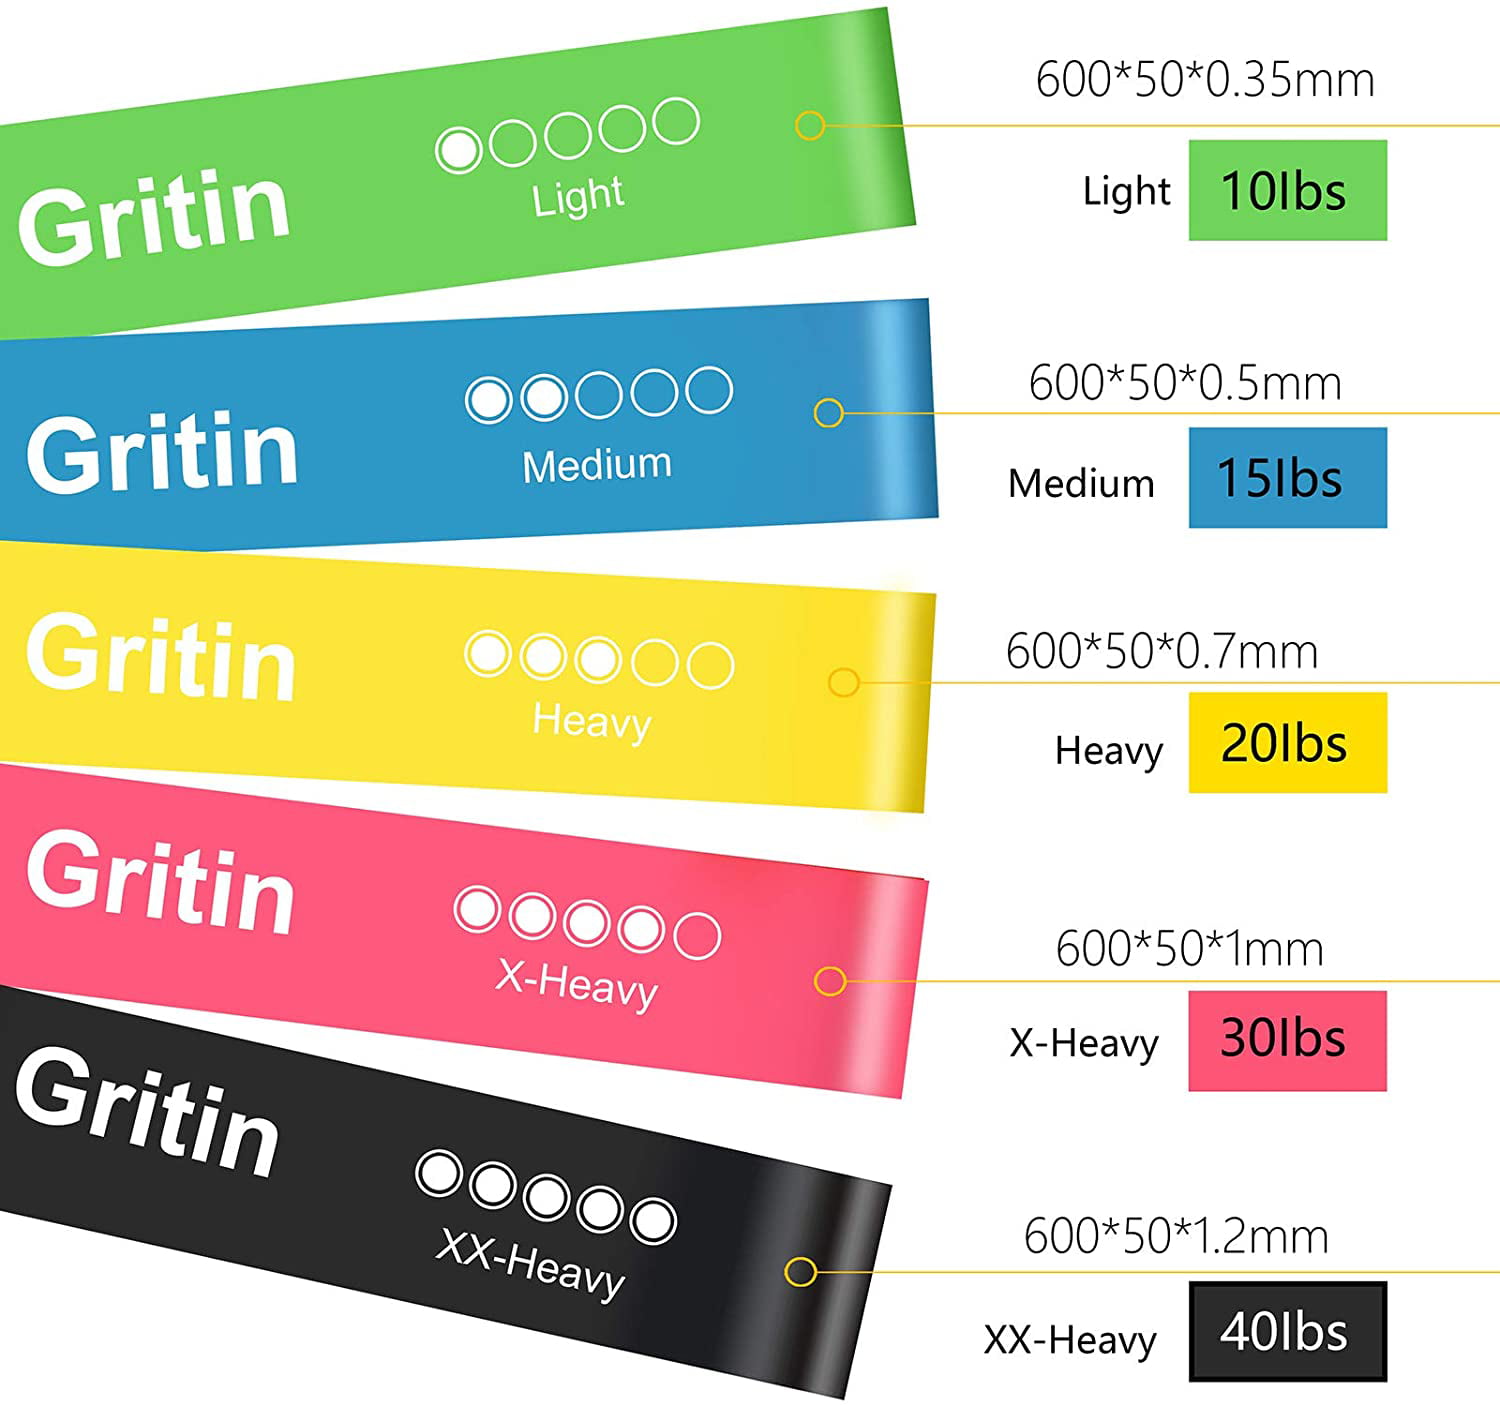 Gym Training Skin-Friendly Resistance Fitness Exercise Loop Bands with 5 Different Resistance Levels Yoga Gritin Resistance Bands, Set of 5 Carrying Case Included Ideal for Home 